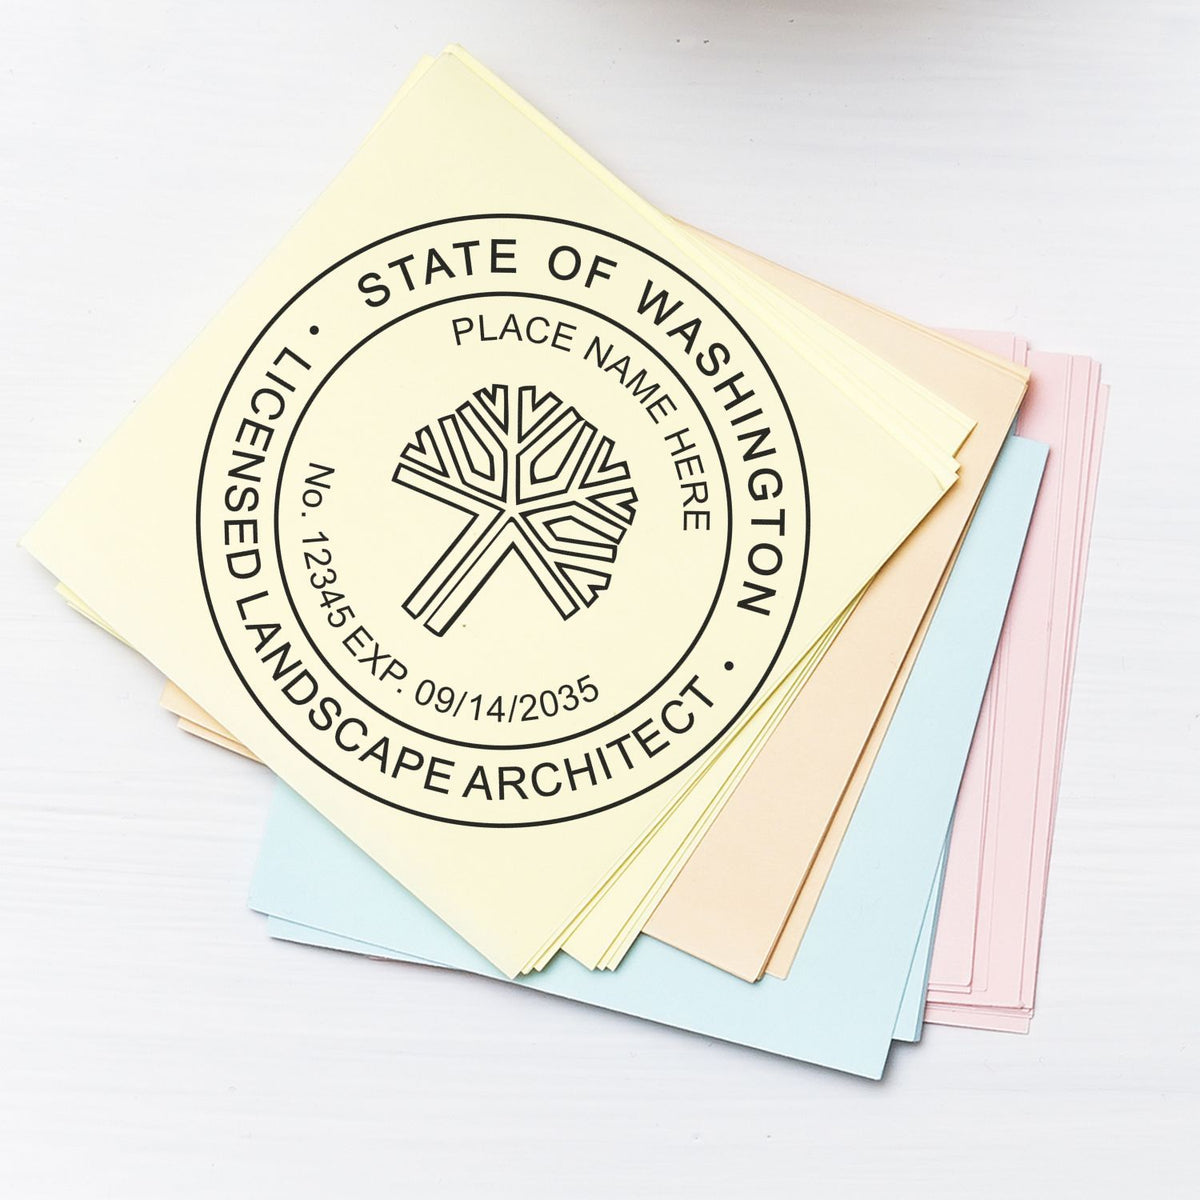 A stamped impression of the Digital Washington Landscape Architect Stamp in this stylish lifestyle photo, setting the tone for a unique and personalized product.